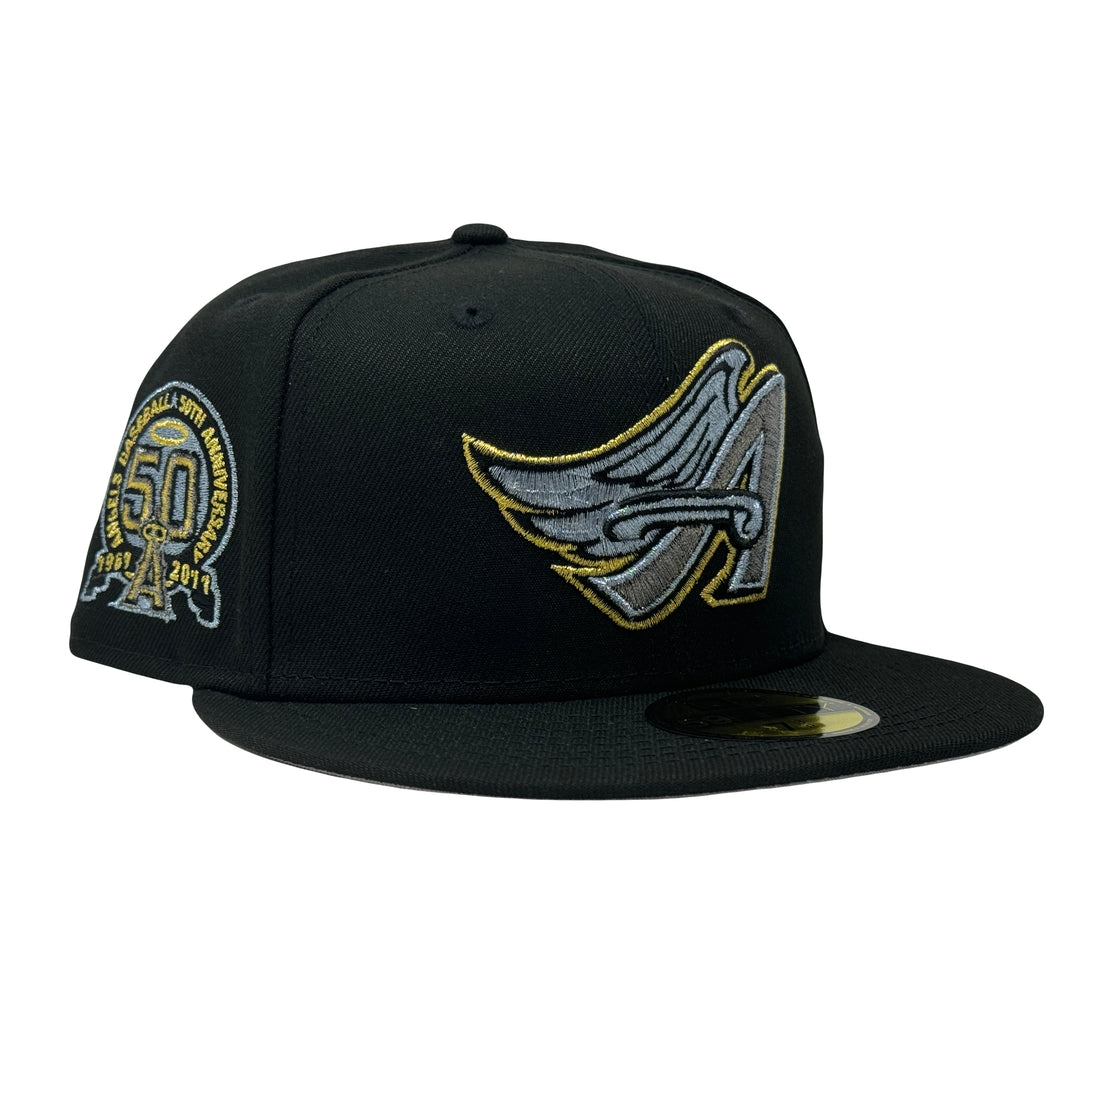 Los Angeles Angels 50th Anniversary Metallic Pack 59Fifty New Era Fitted Hat